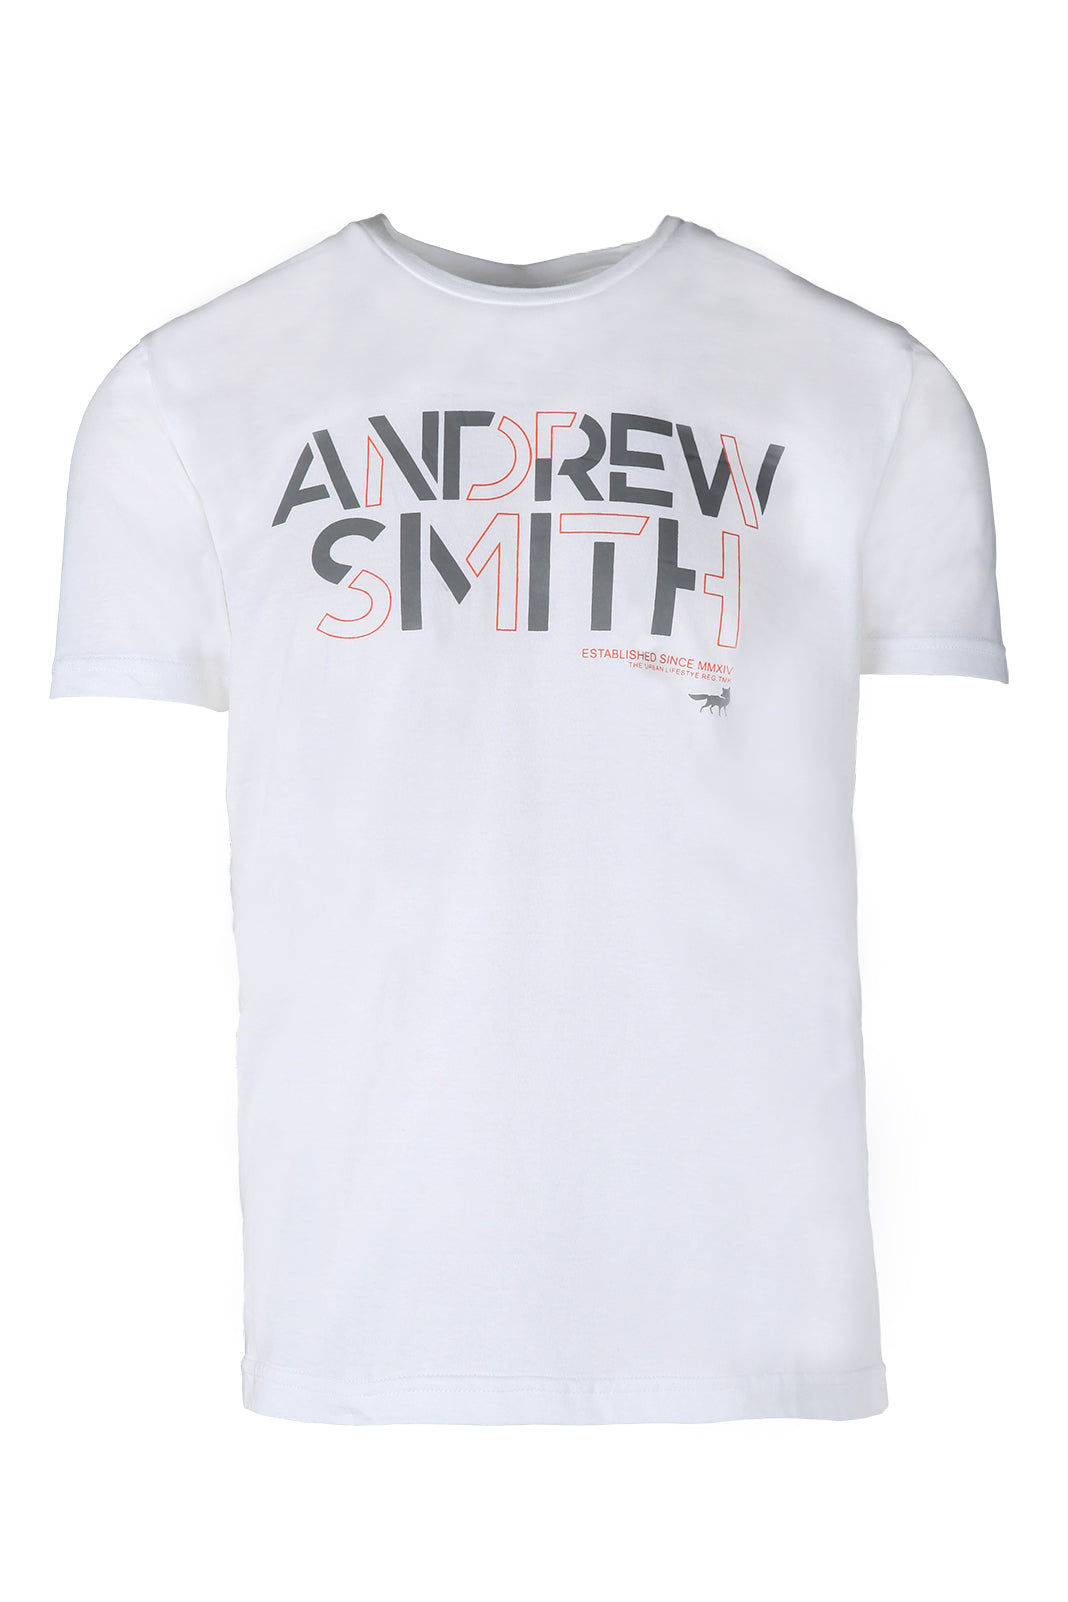 Andrew Smith T-Shirt Slim Fit Pria A0112X08D